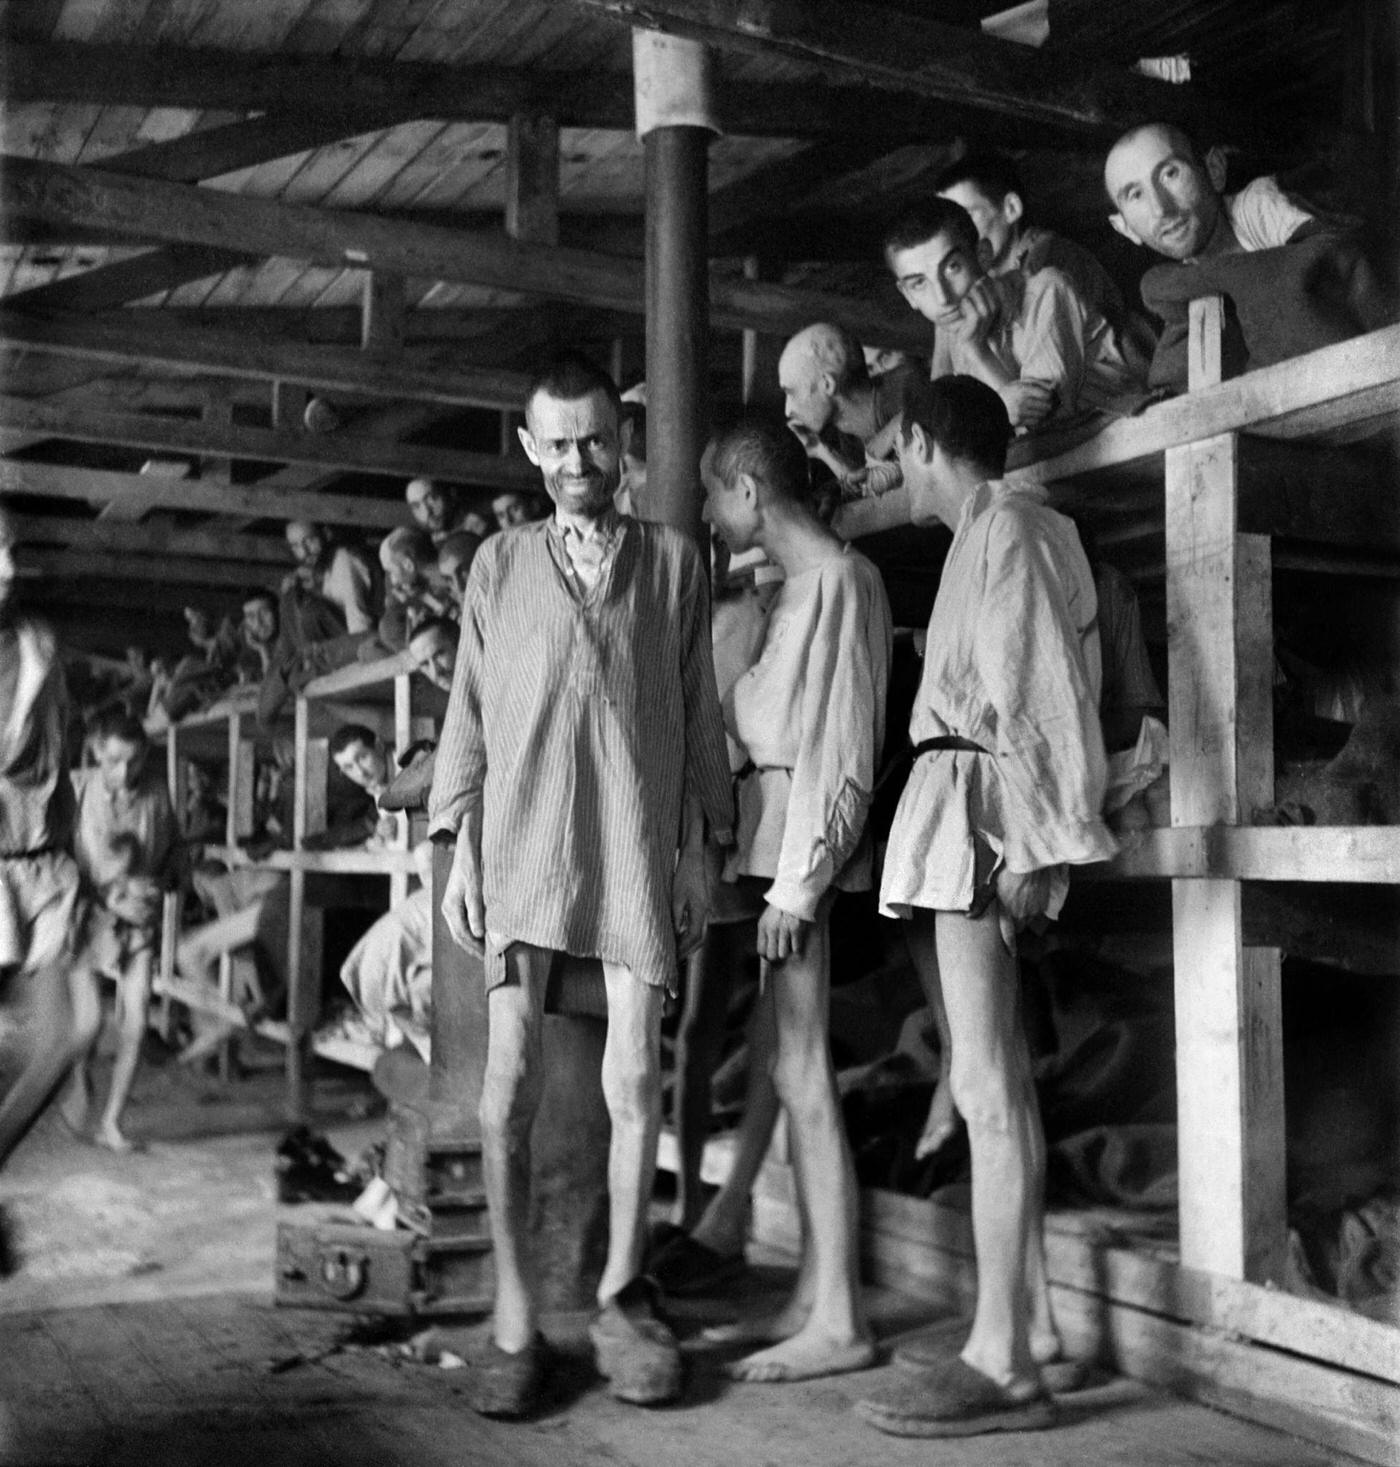 Prisoners dressed in wooden shirts and clogs given upon arrival at Buchenwald concentration camp, April 1945.